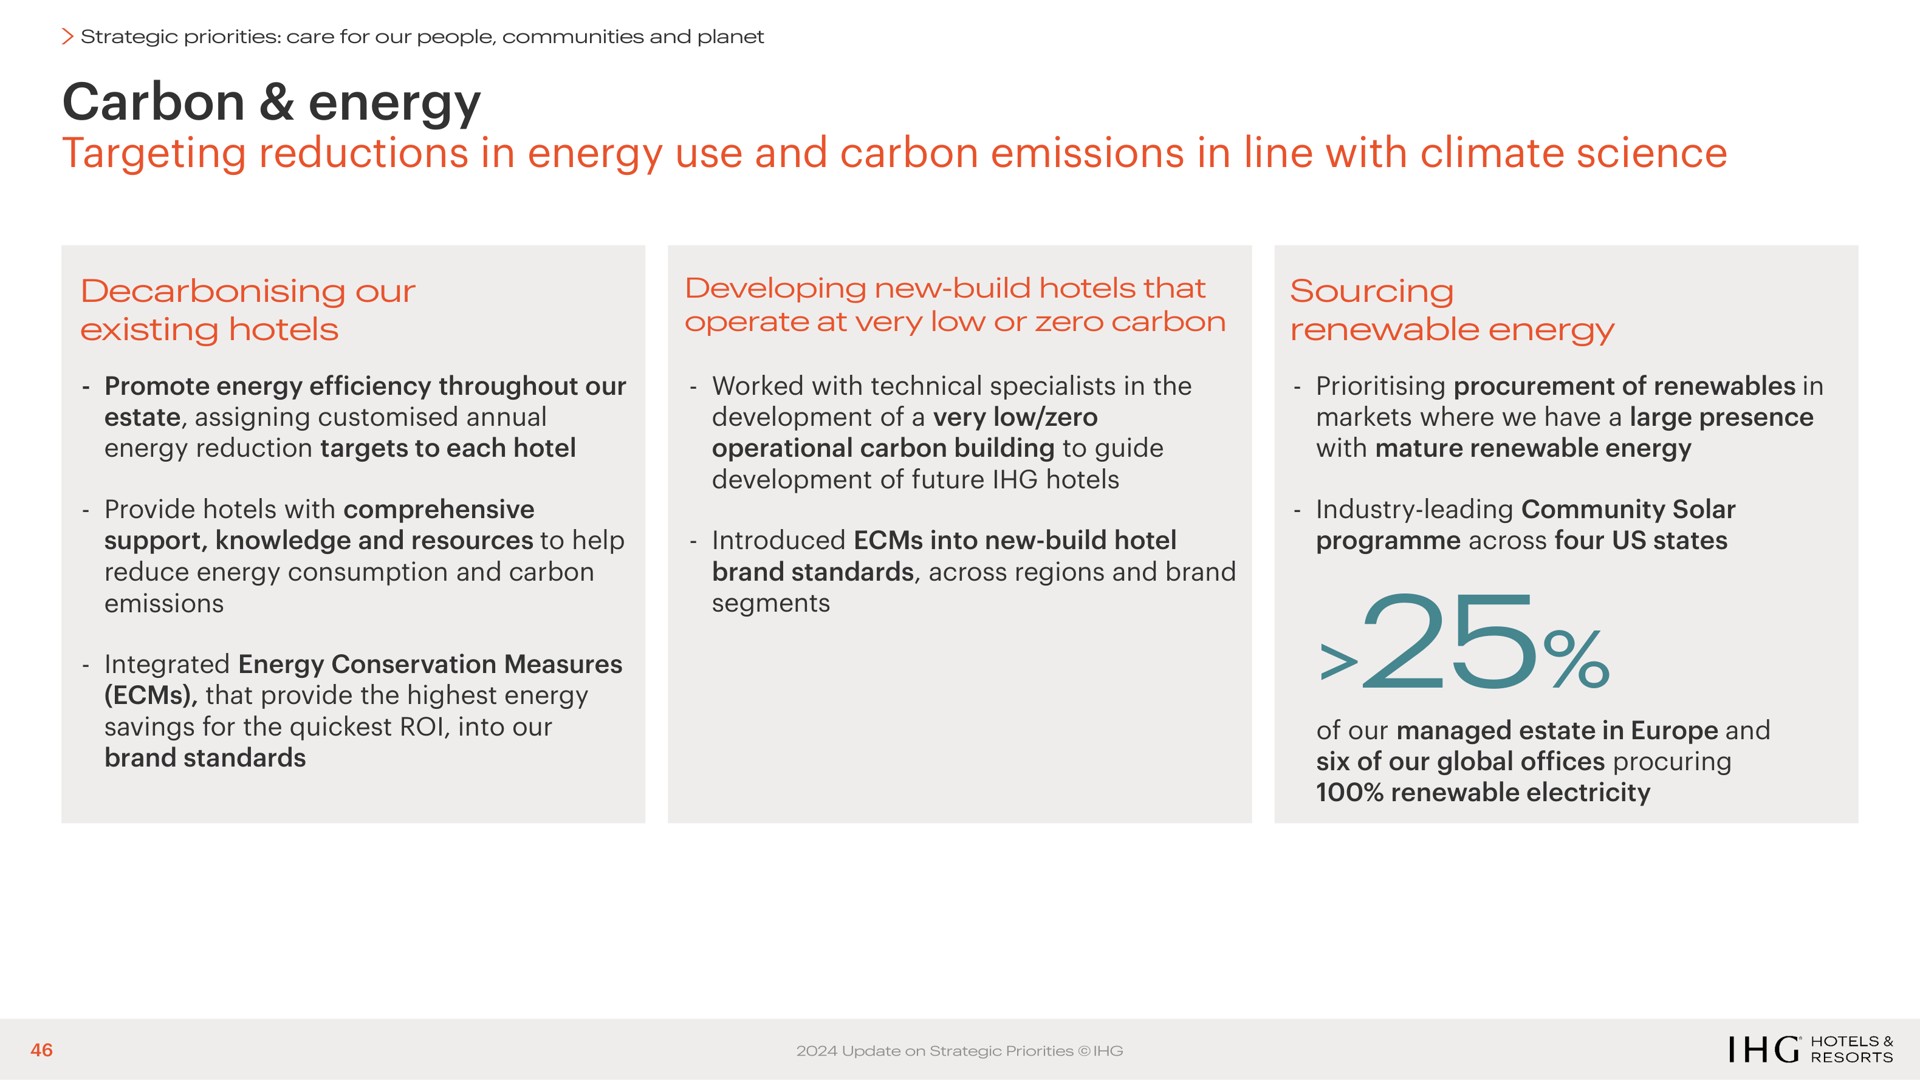 carbon energy targeting reductions in energy use and carbon emissions in line with climate science | IHG Hotels